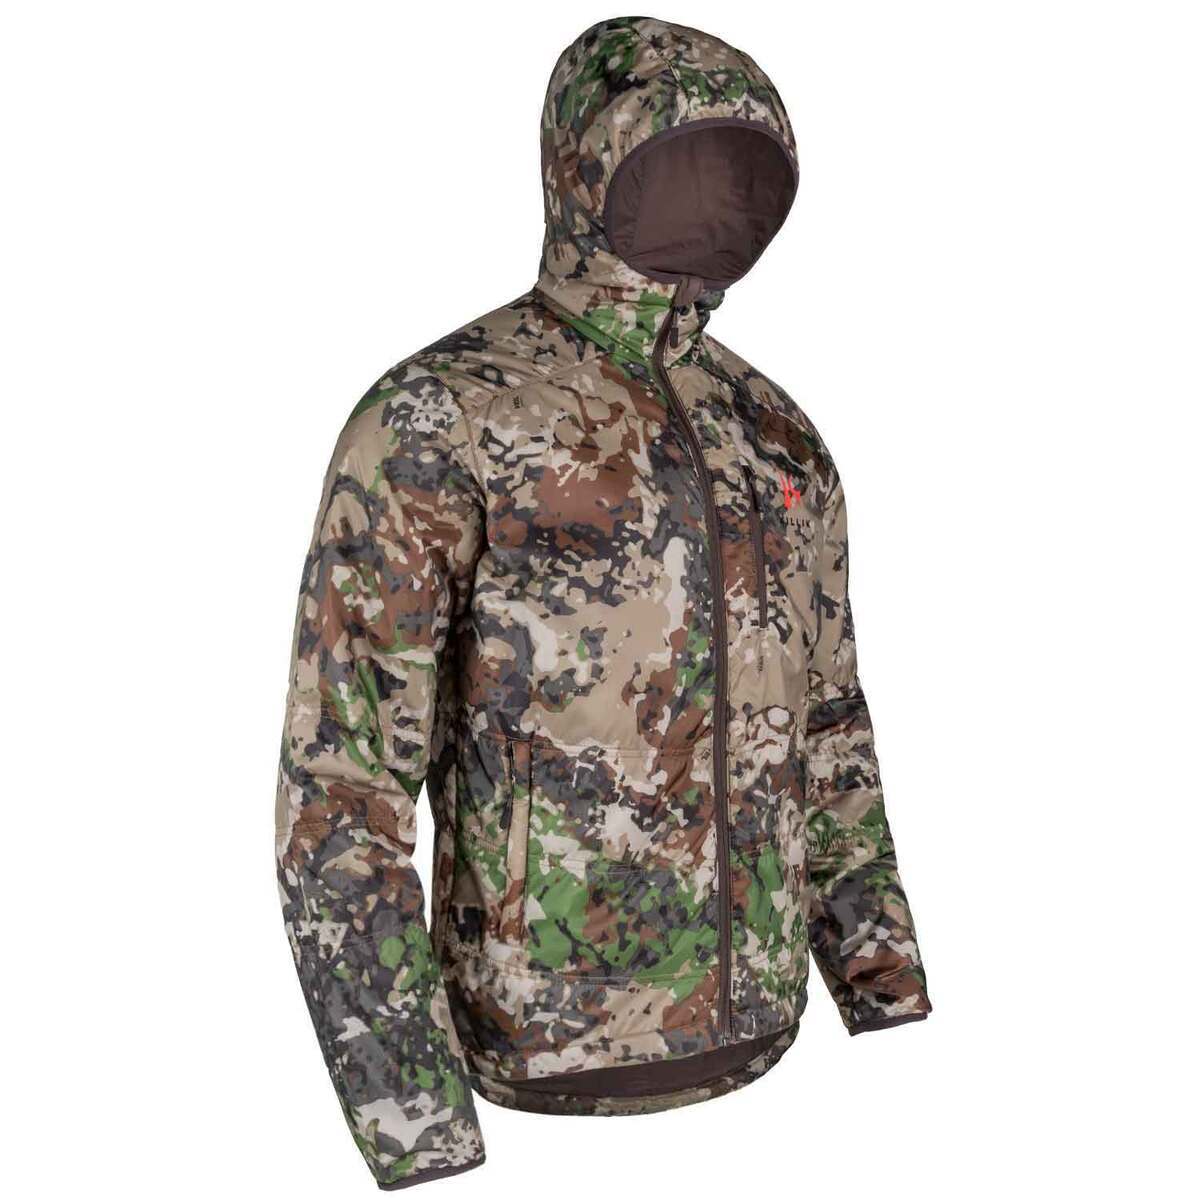 SIMMS M'S FREESTONE JACKET - Mountain View Sports and Adventure Apparel